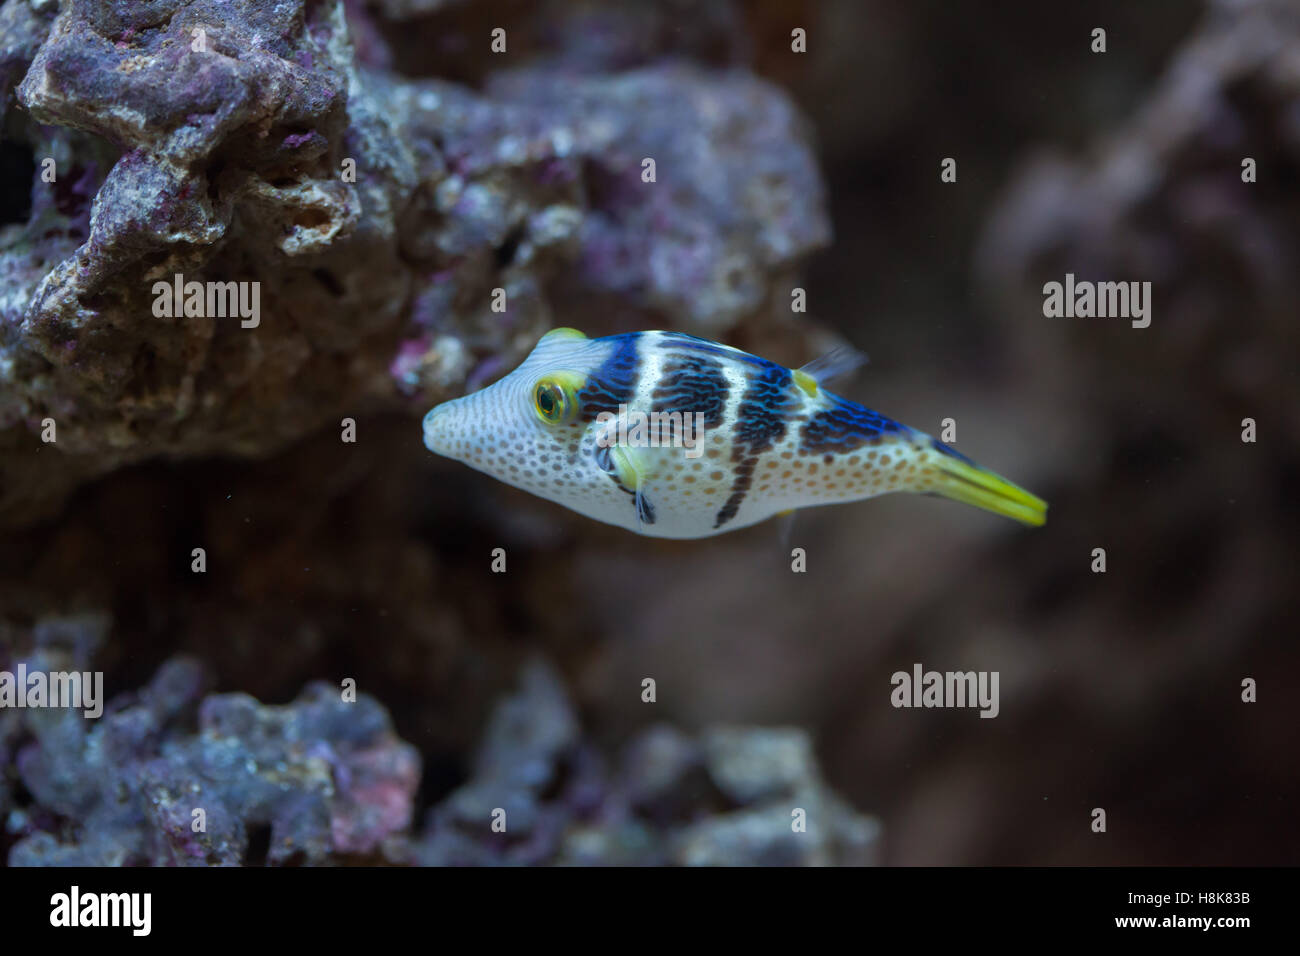 Valentinni's sharpnose puffer (Canthigaster valentini), also known as the saddled puffer. Stock Photo